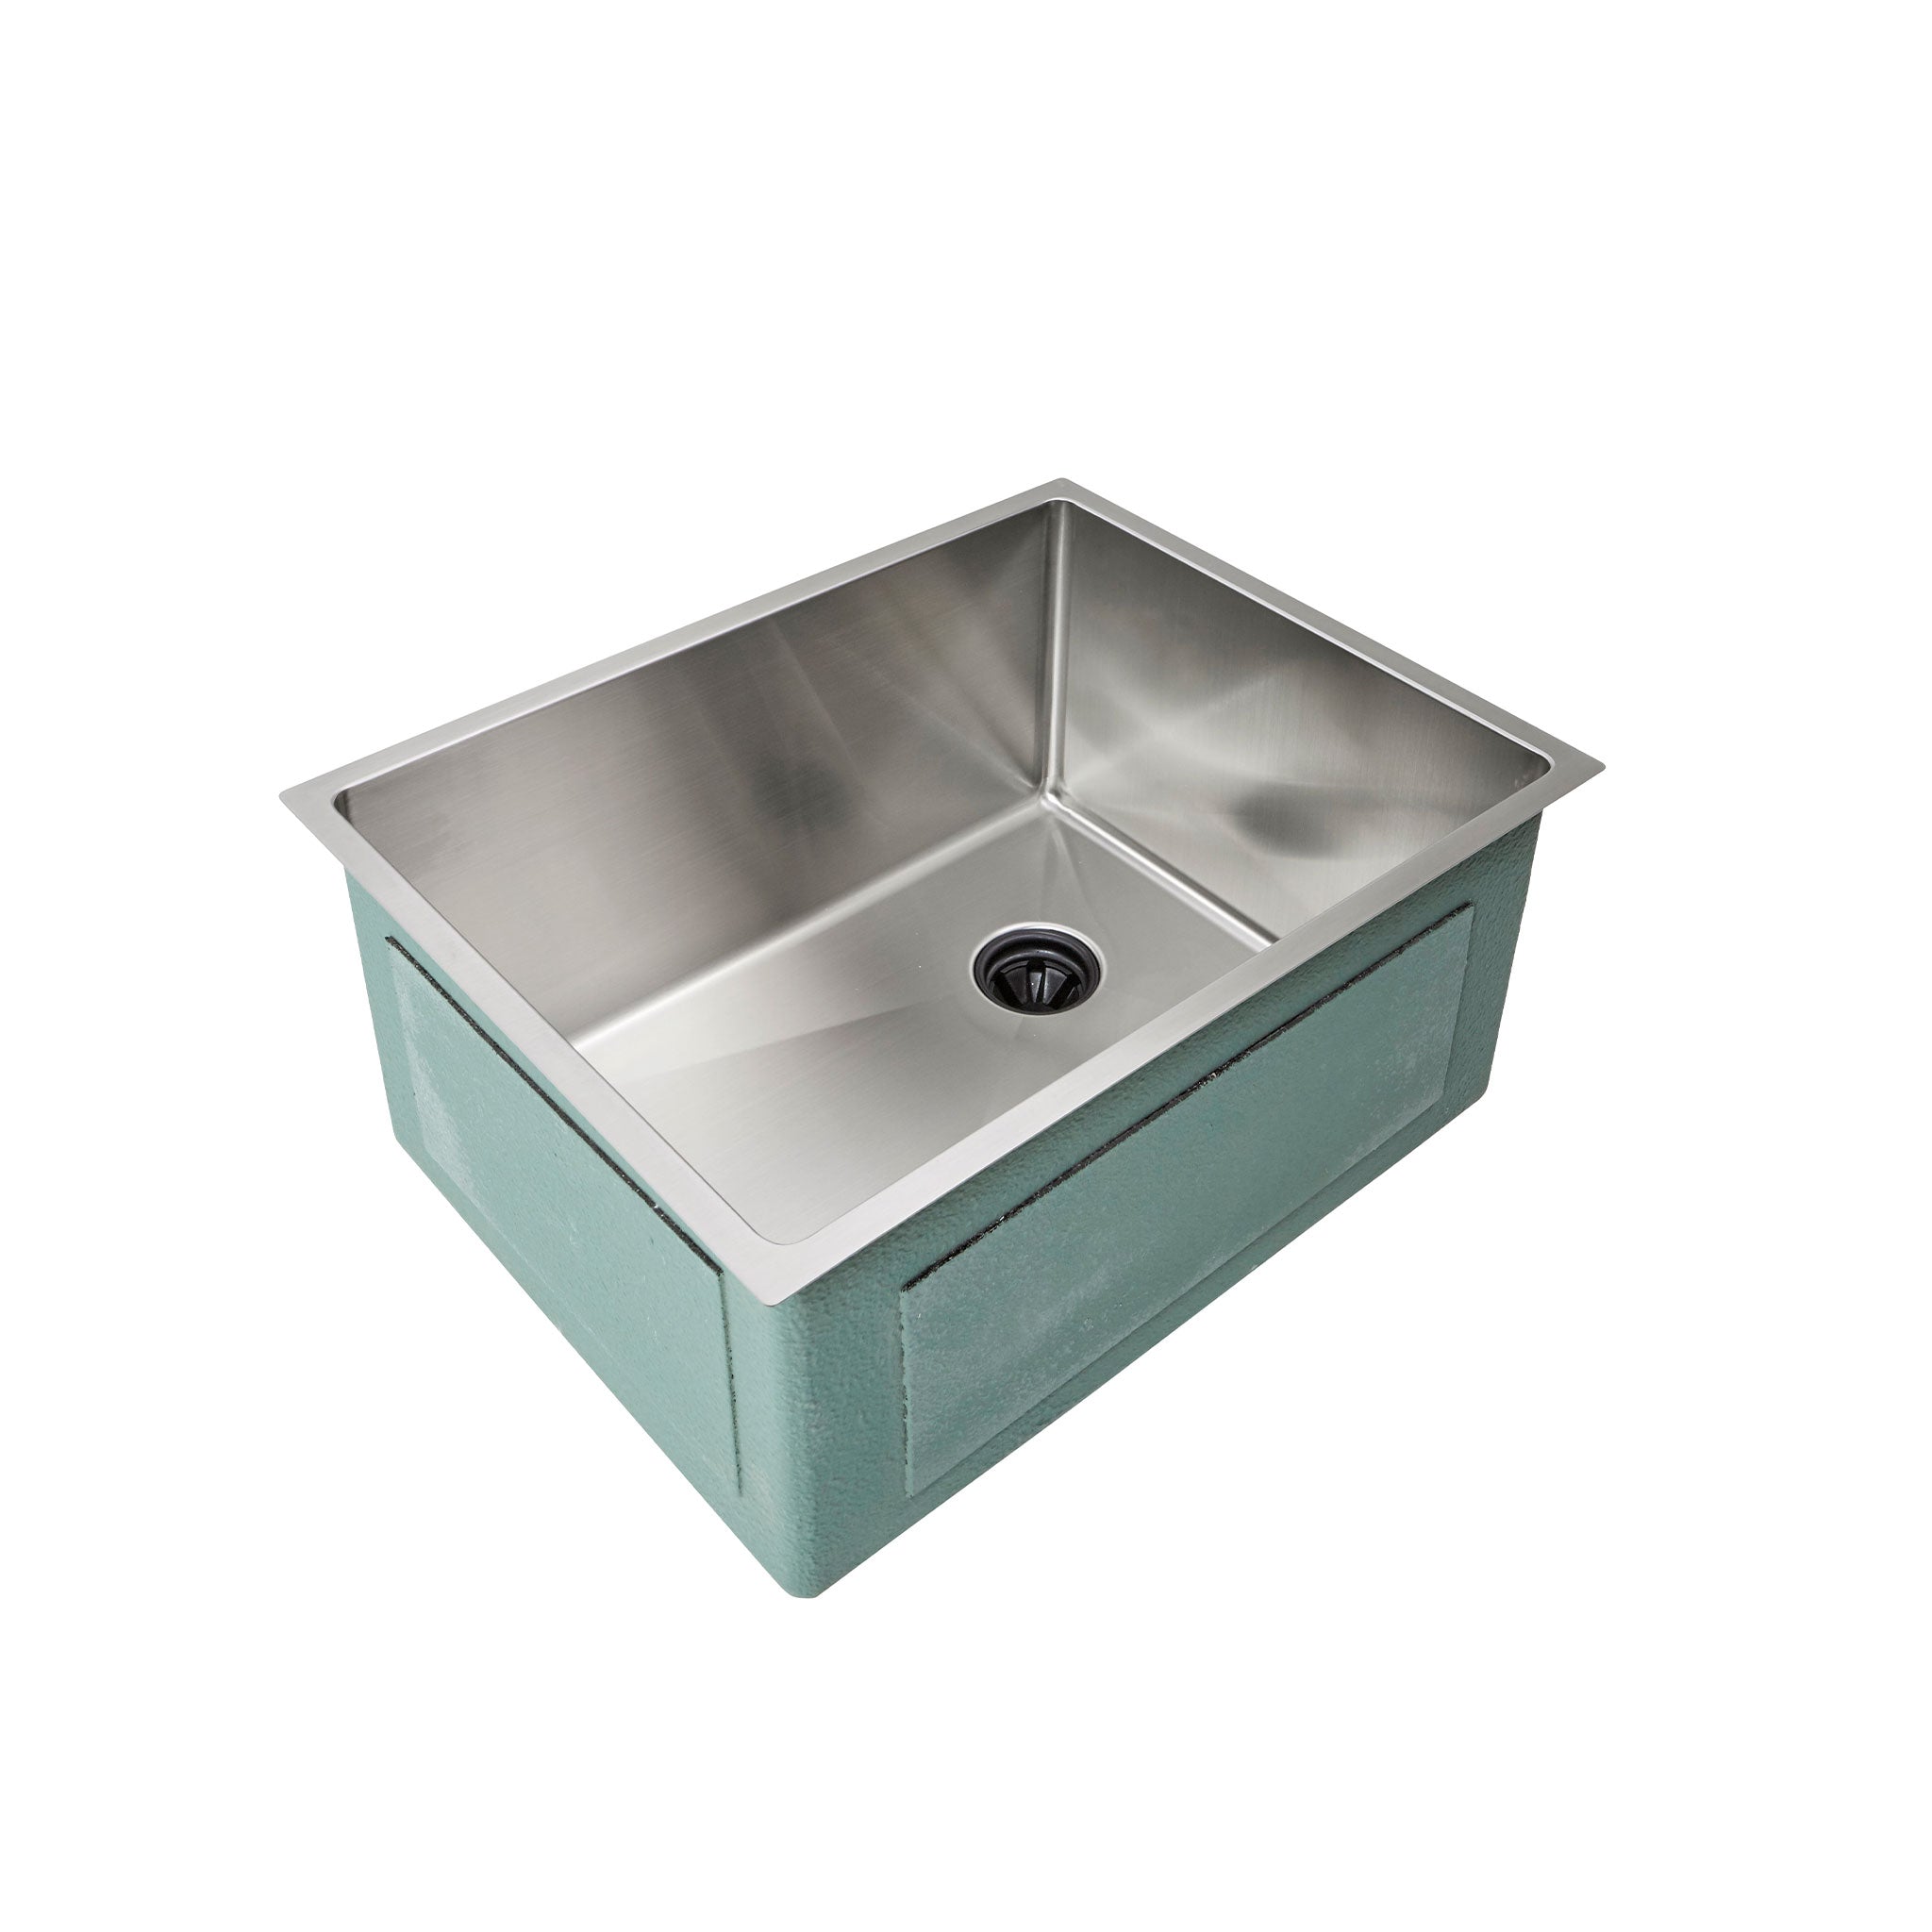 22”, 16-gauge stainless steel classic-style, single bowl kitchen sink with an offset drain right and half inch radius corner.